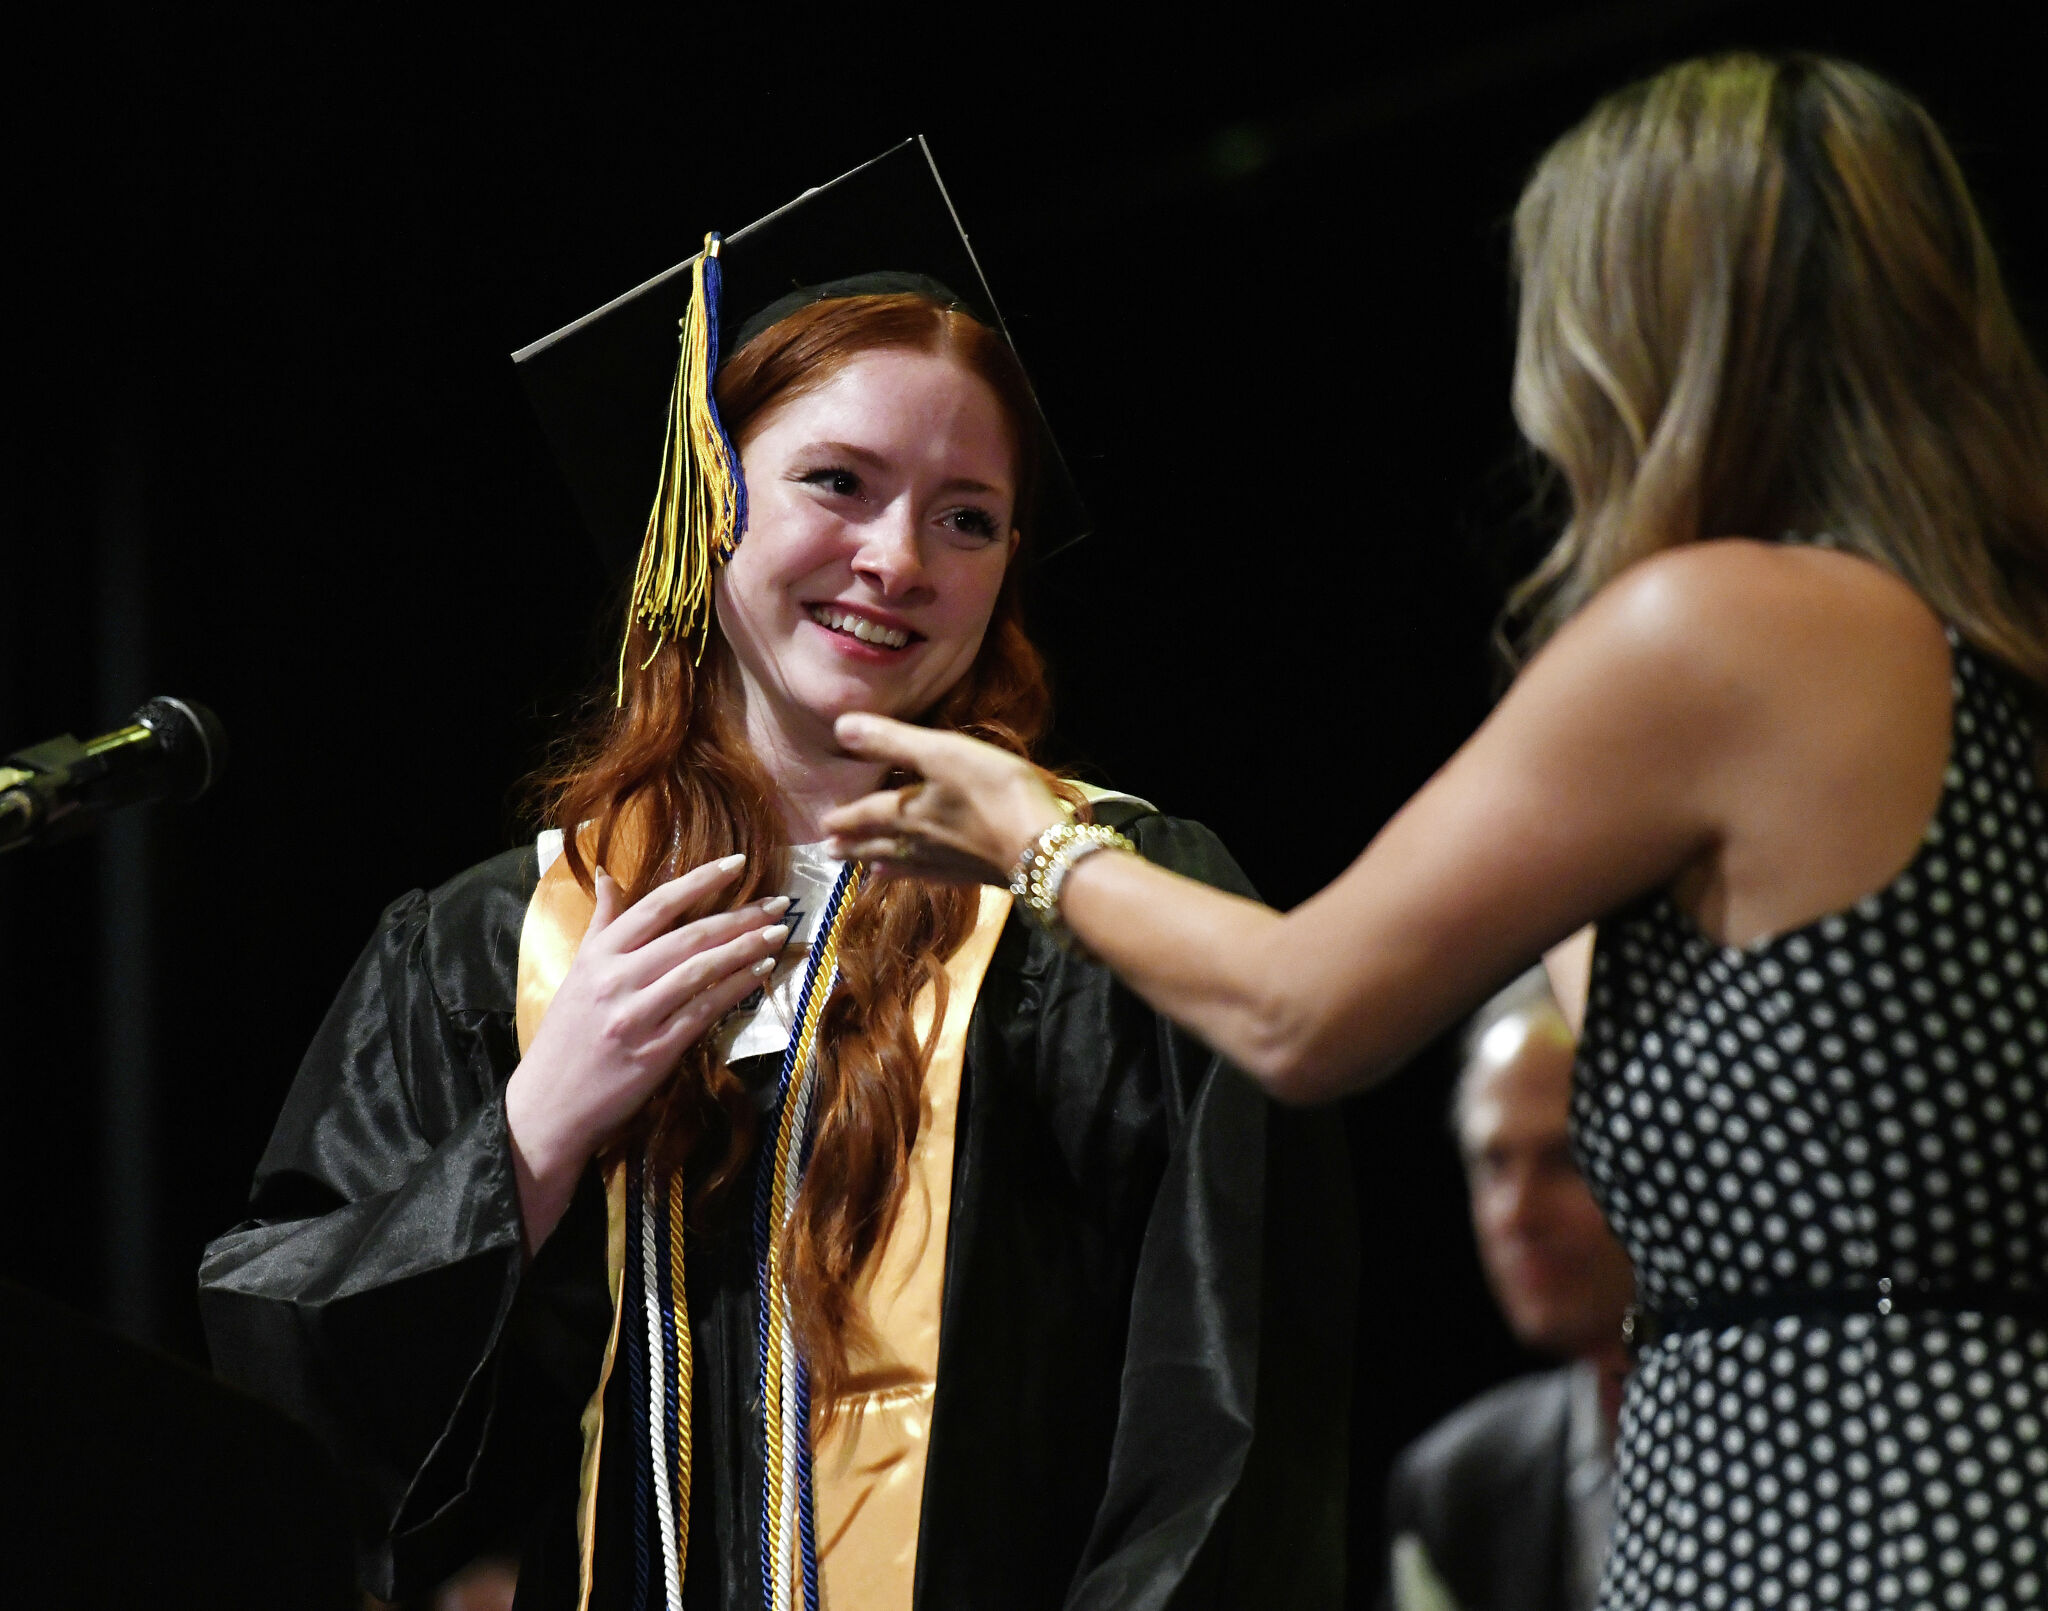 Stamford’s AITE hands out diplomas during commencement